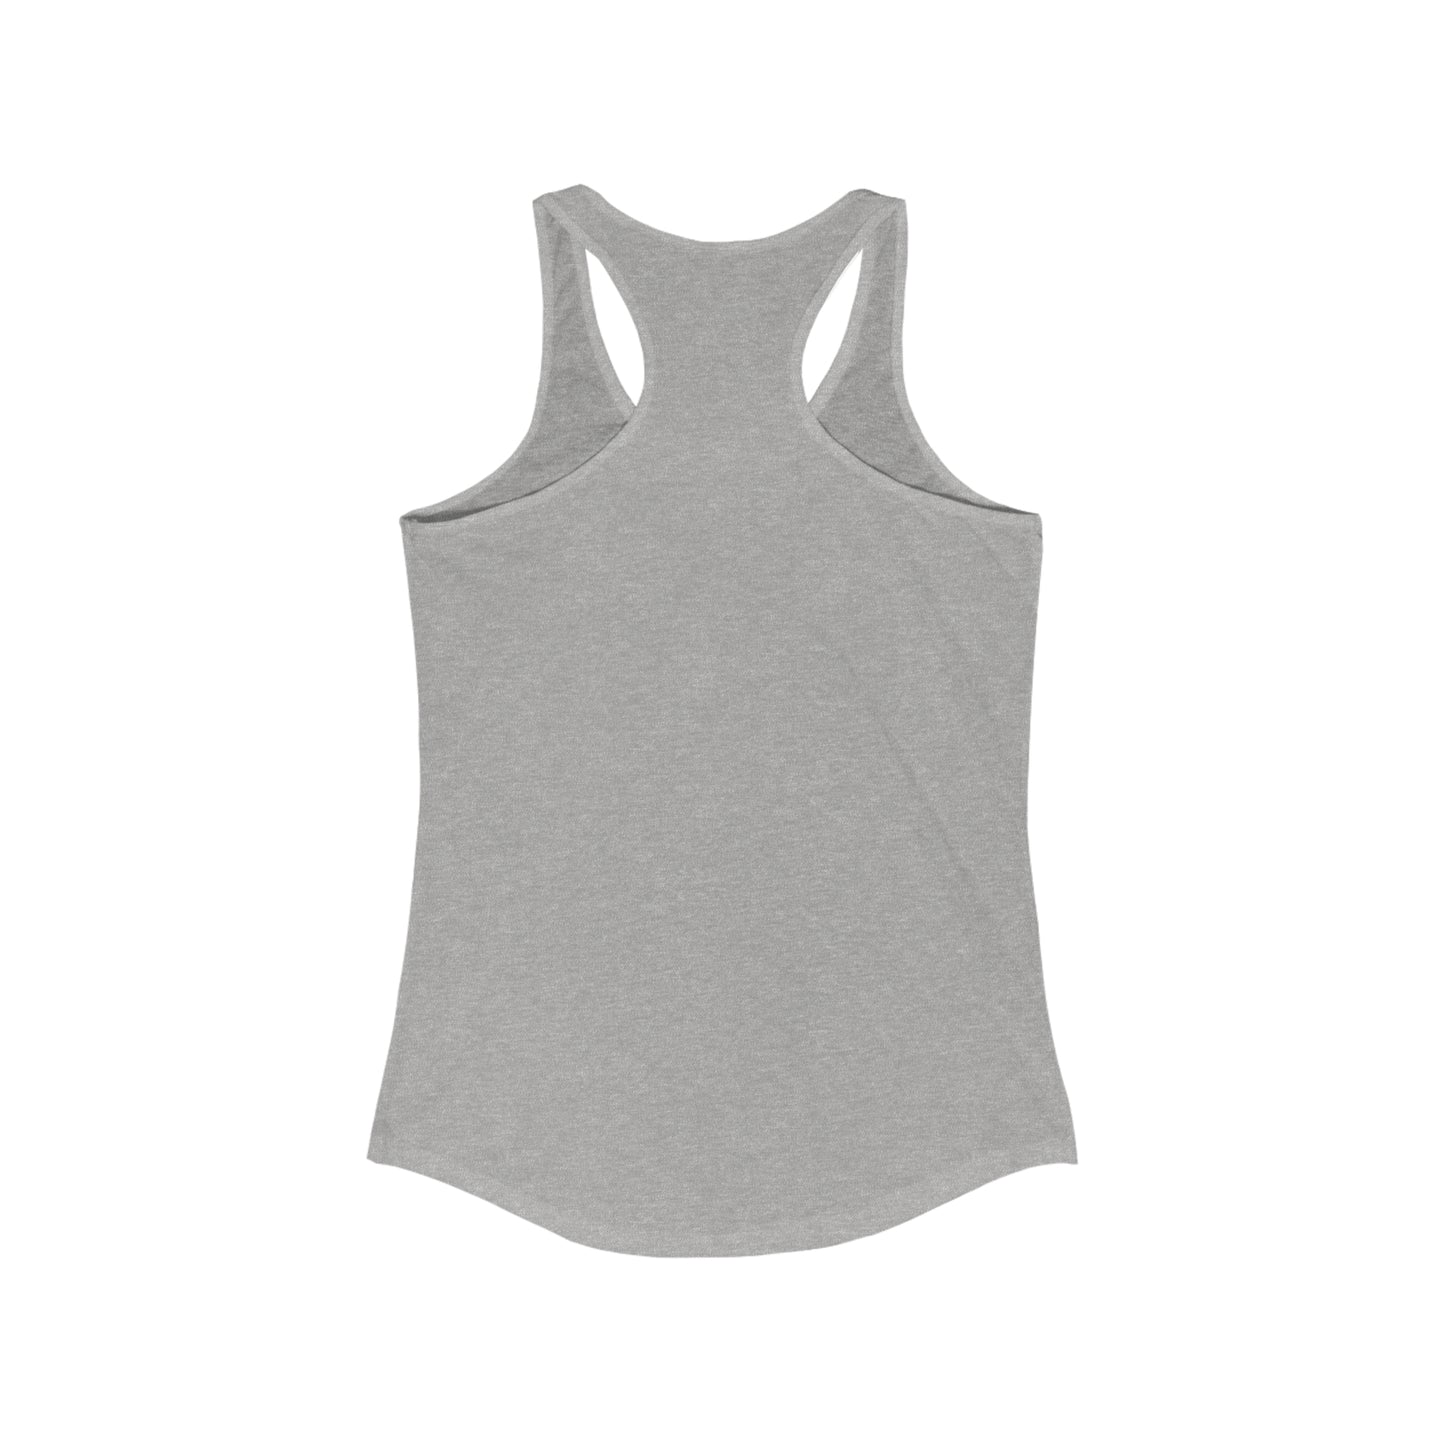 Exploring Happy Trails In a Jeep. Women's Ideal Racerback Tank